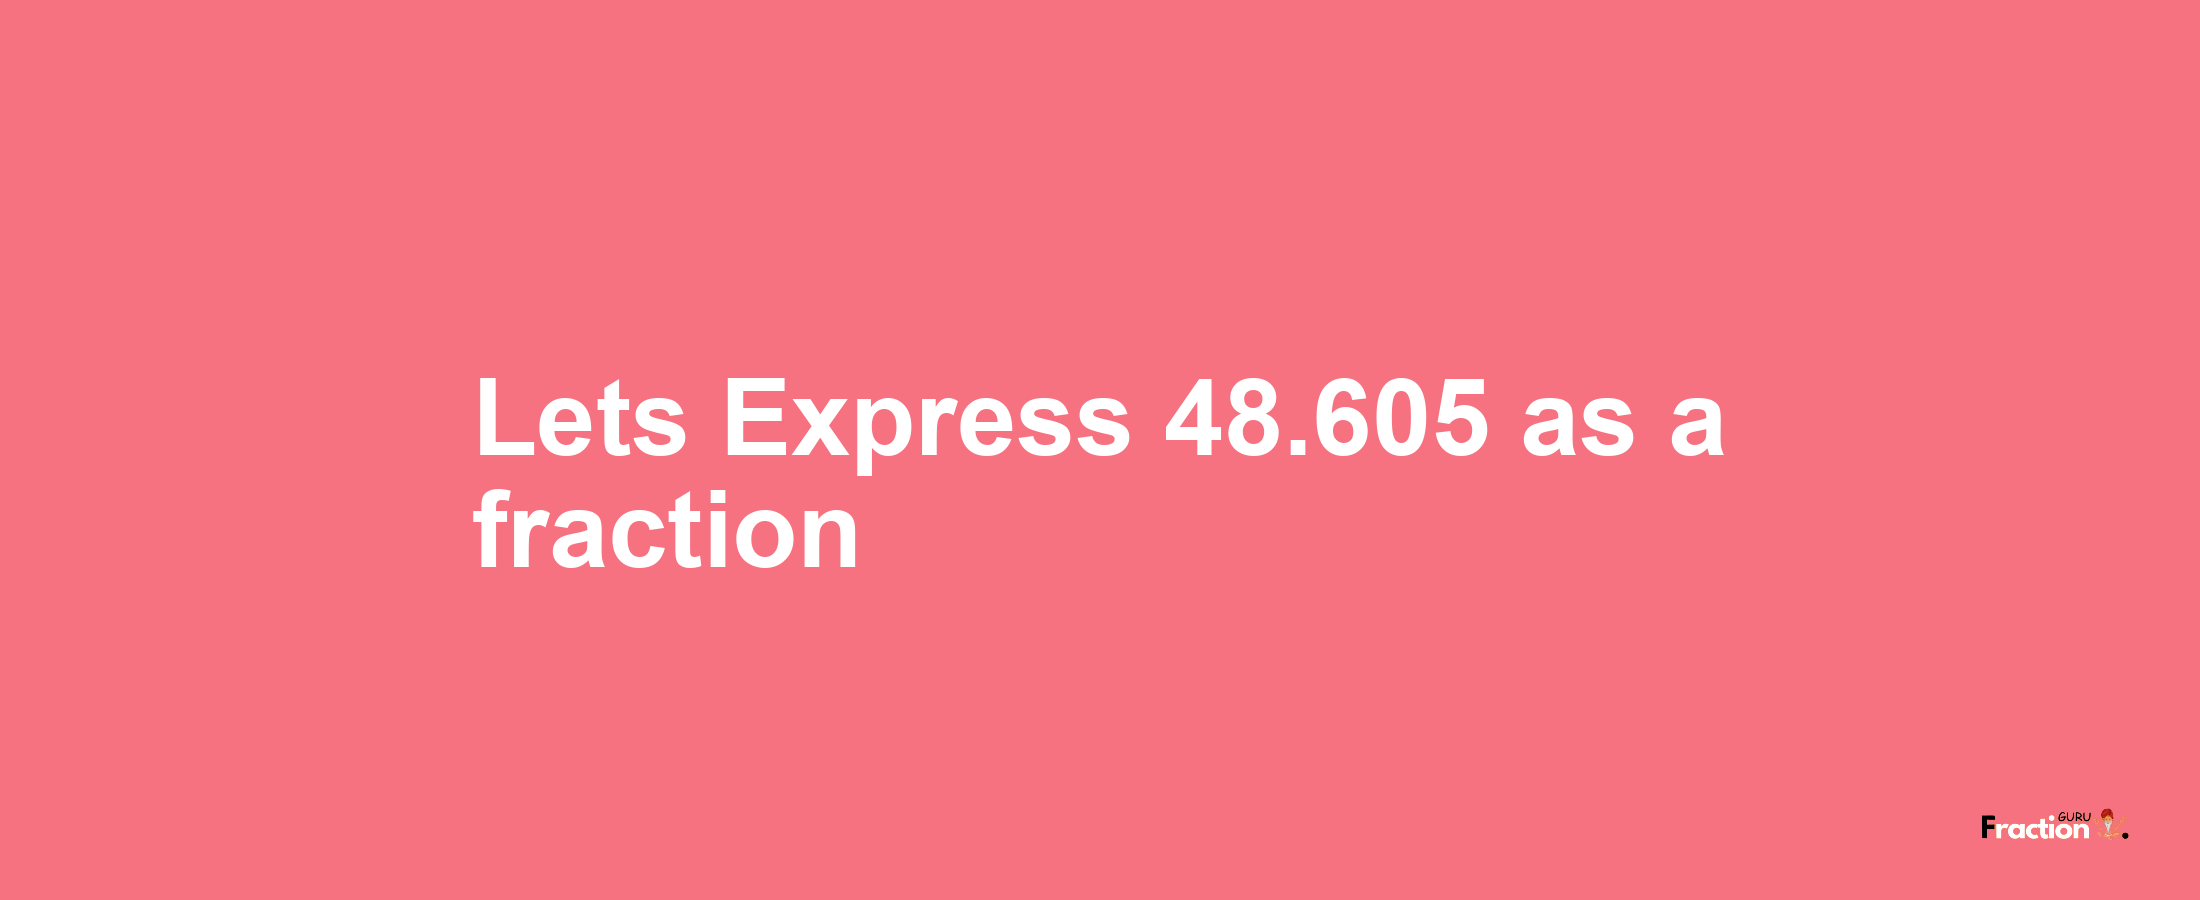 Lets Express 48.605 as afraction